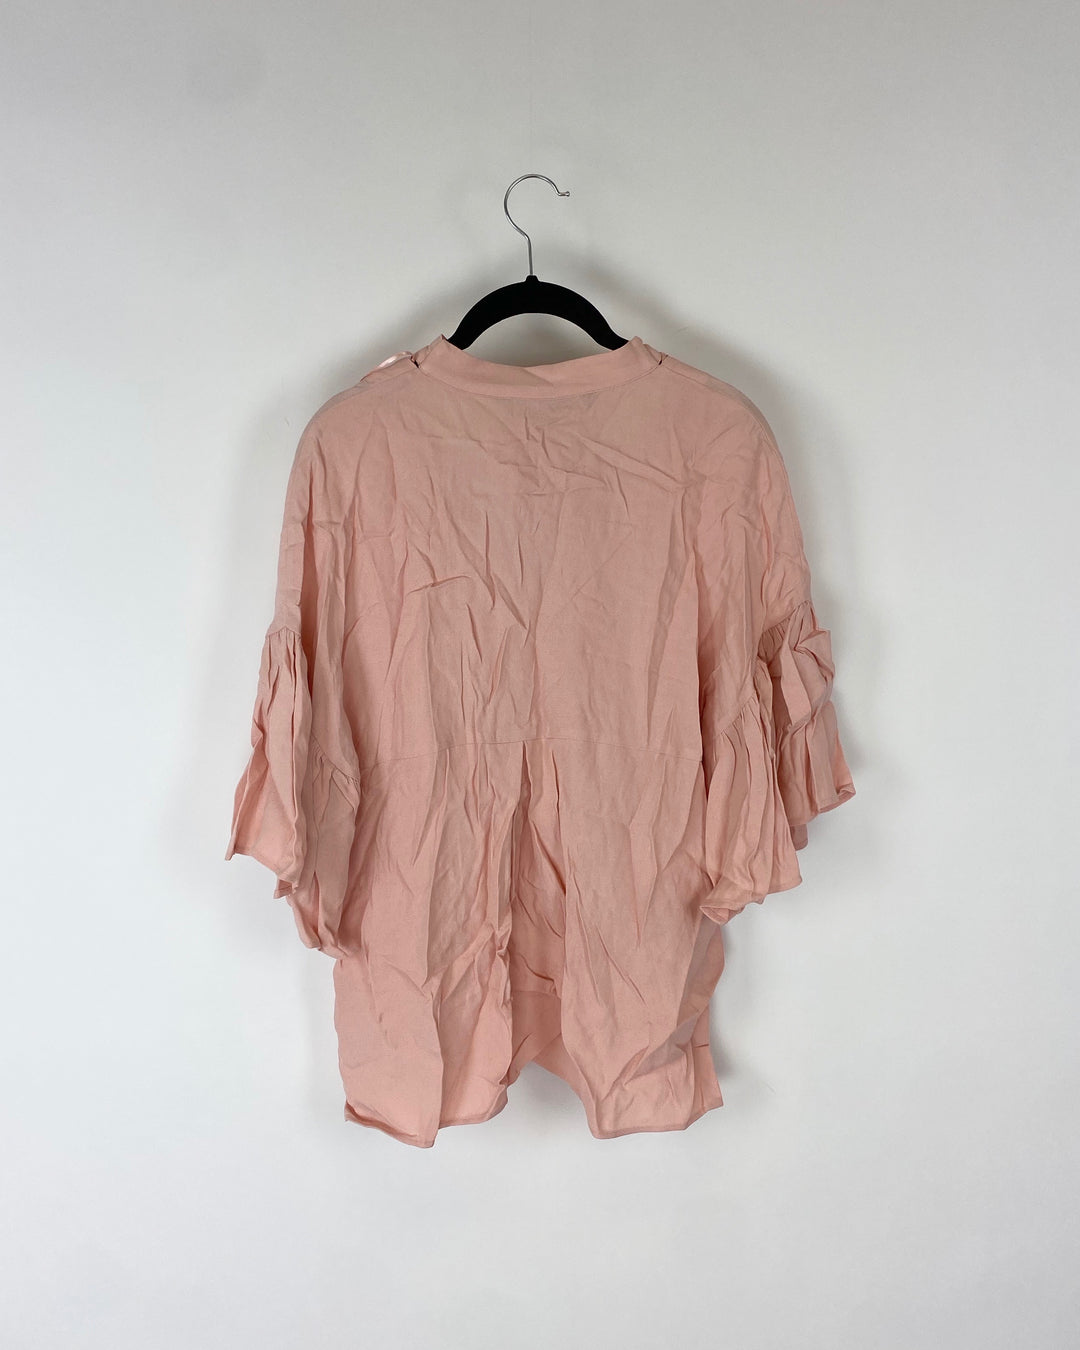 Pink Tie V-Neck Short Sleeve Top - Small